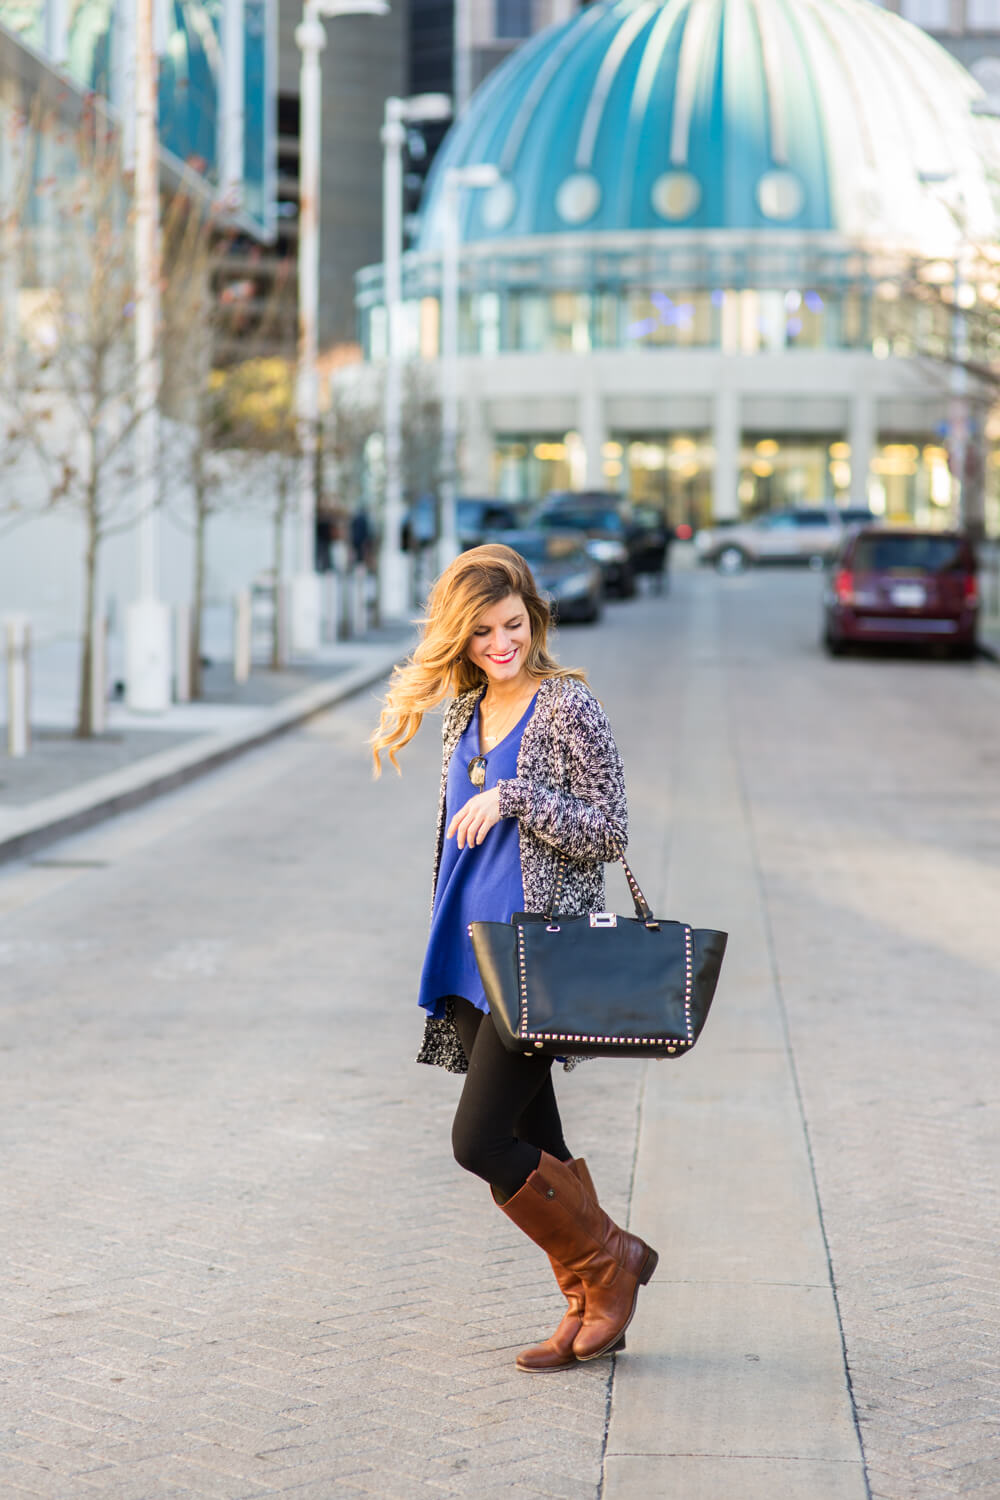 Cobalt Blue Sweater, Black leggings with brown boots